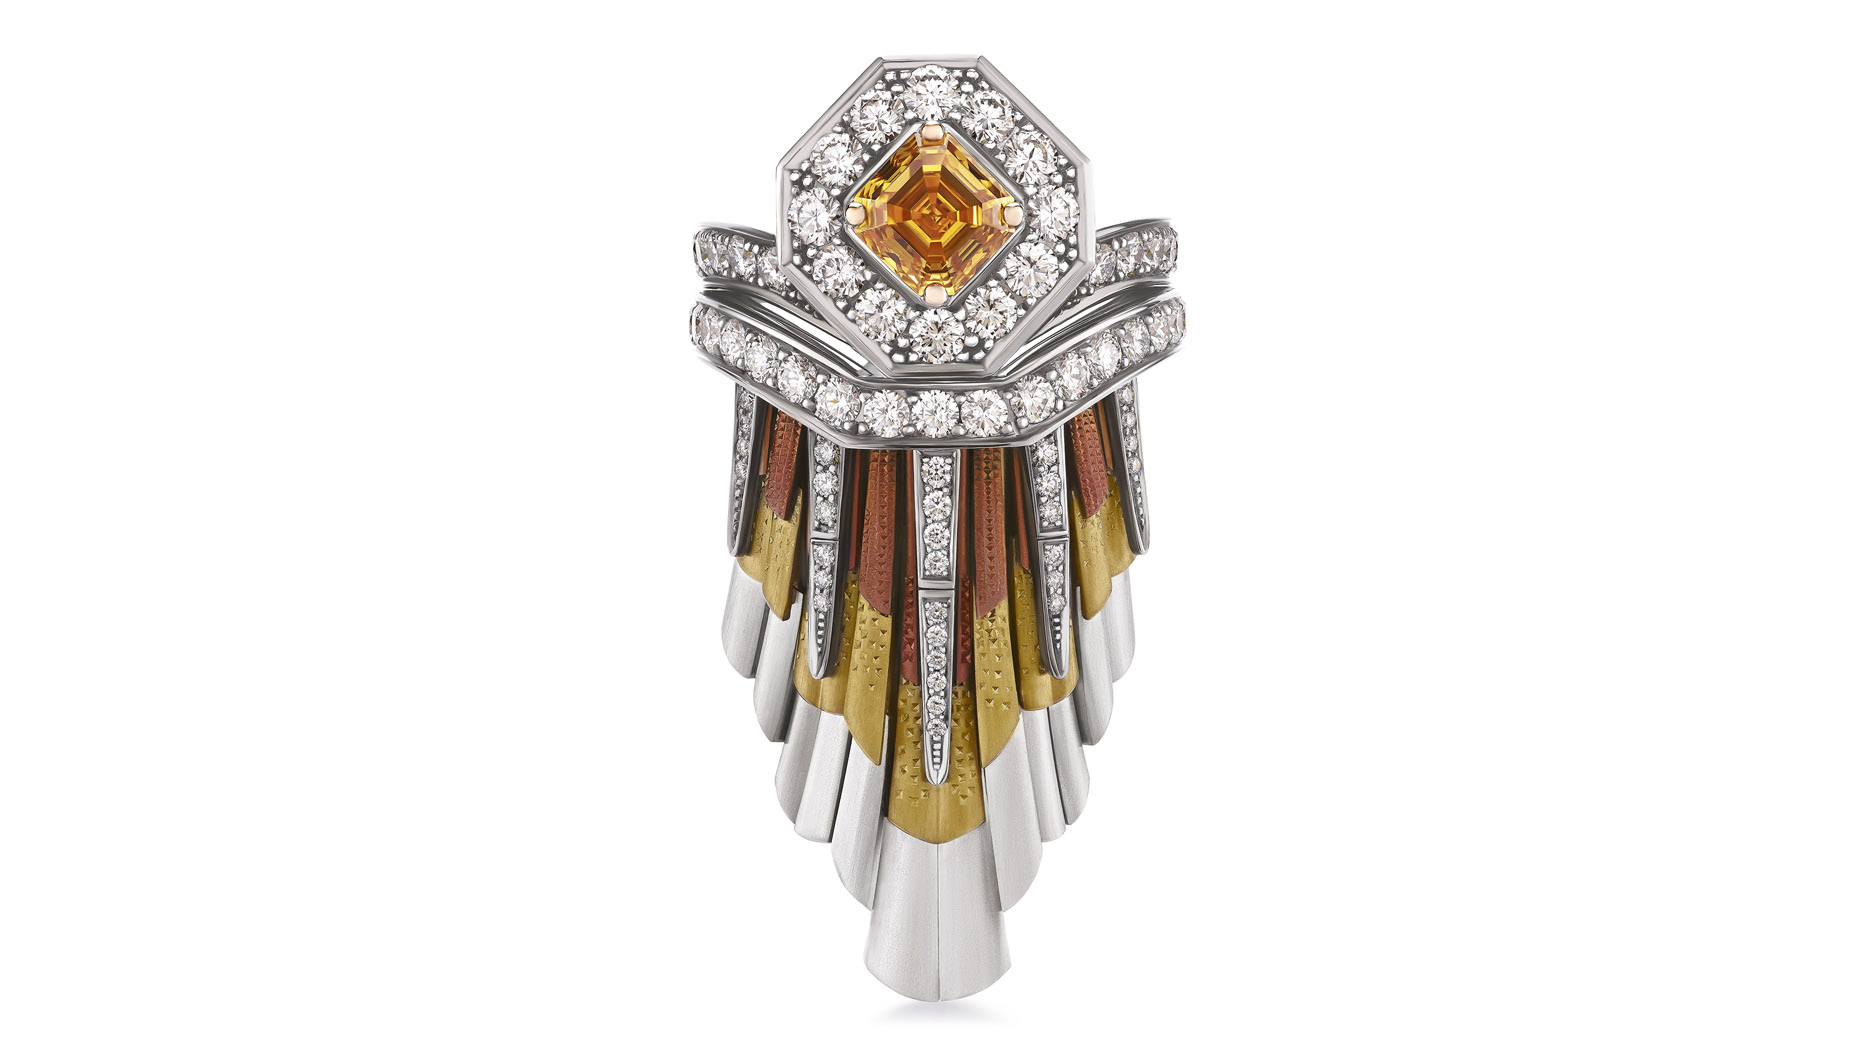 De Beer's Latest High Jewellery Collection 'The Alchemist of Light